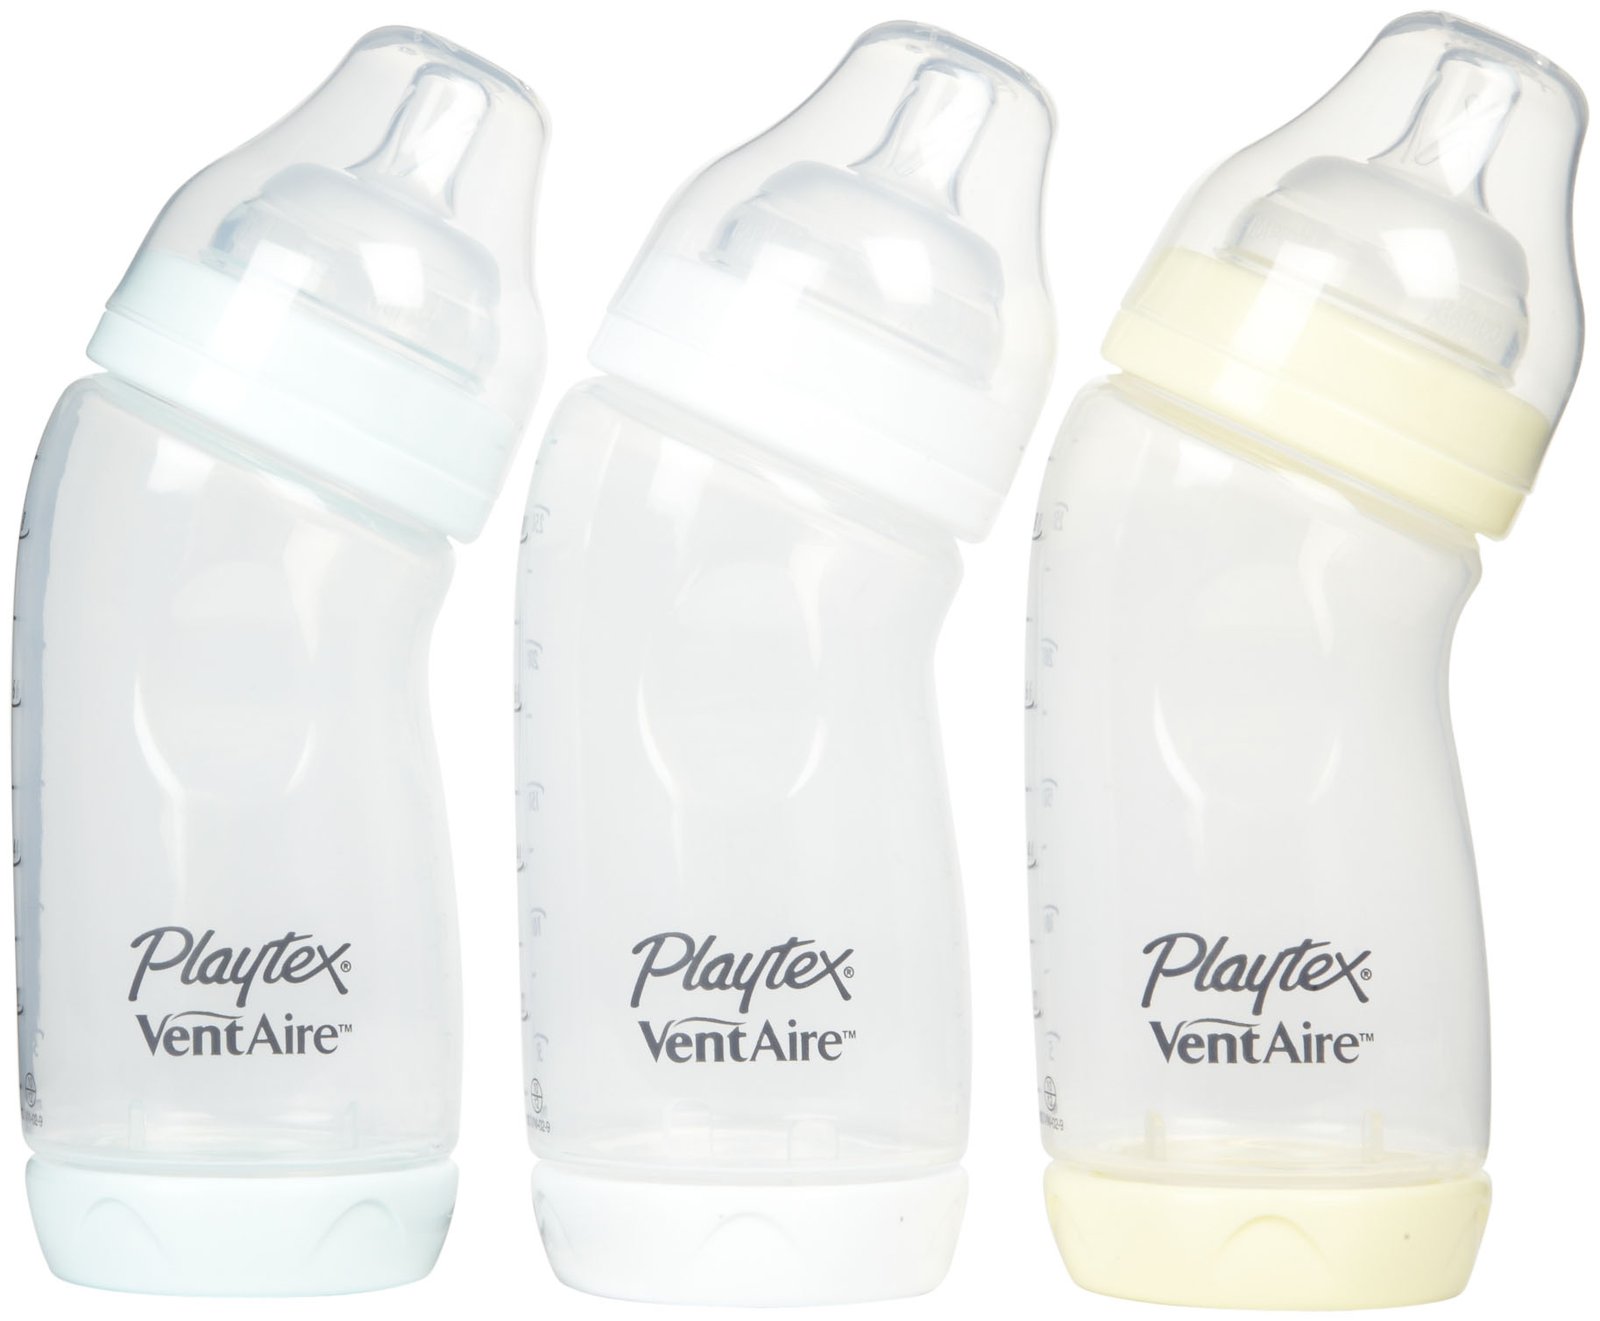 Review of Playtex VentAire Advanced Wide Baby Bottles